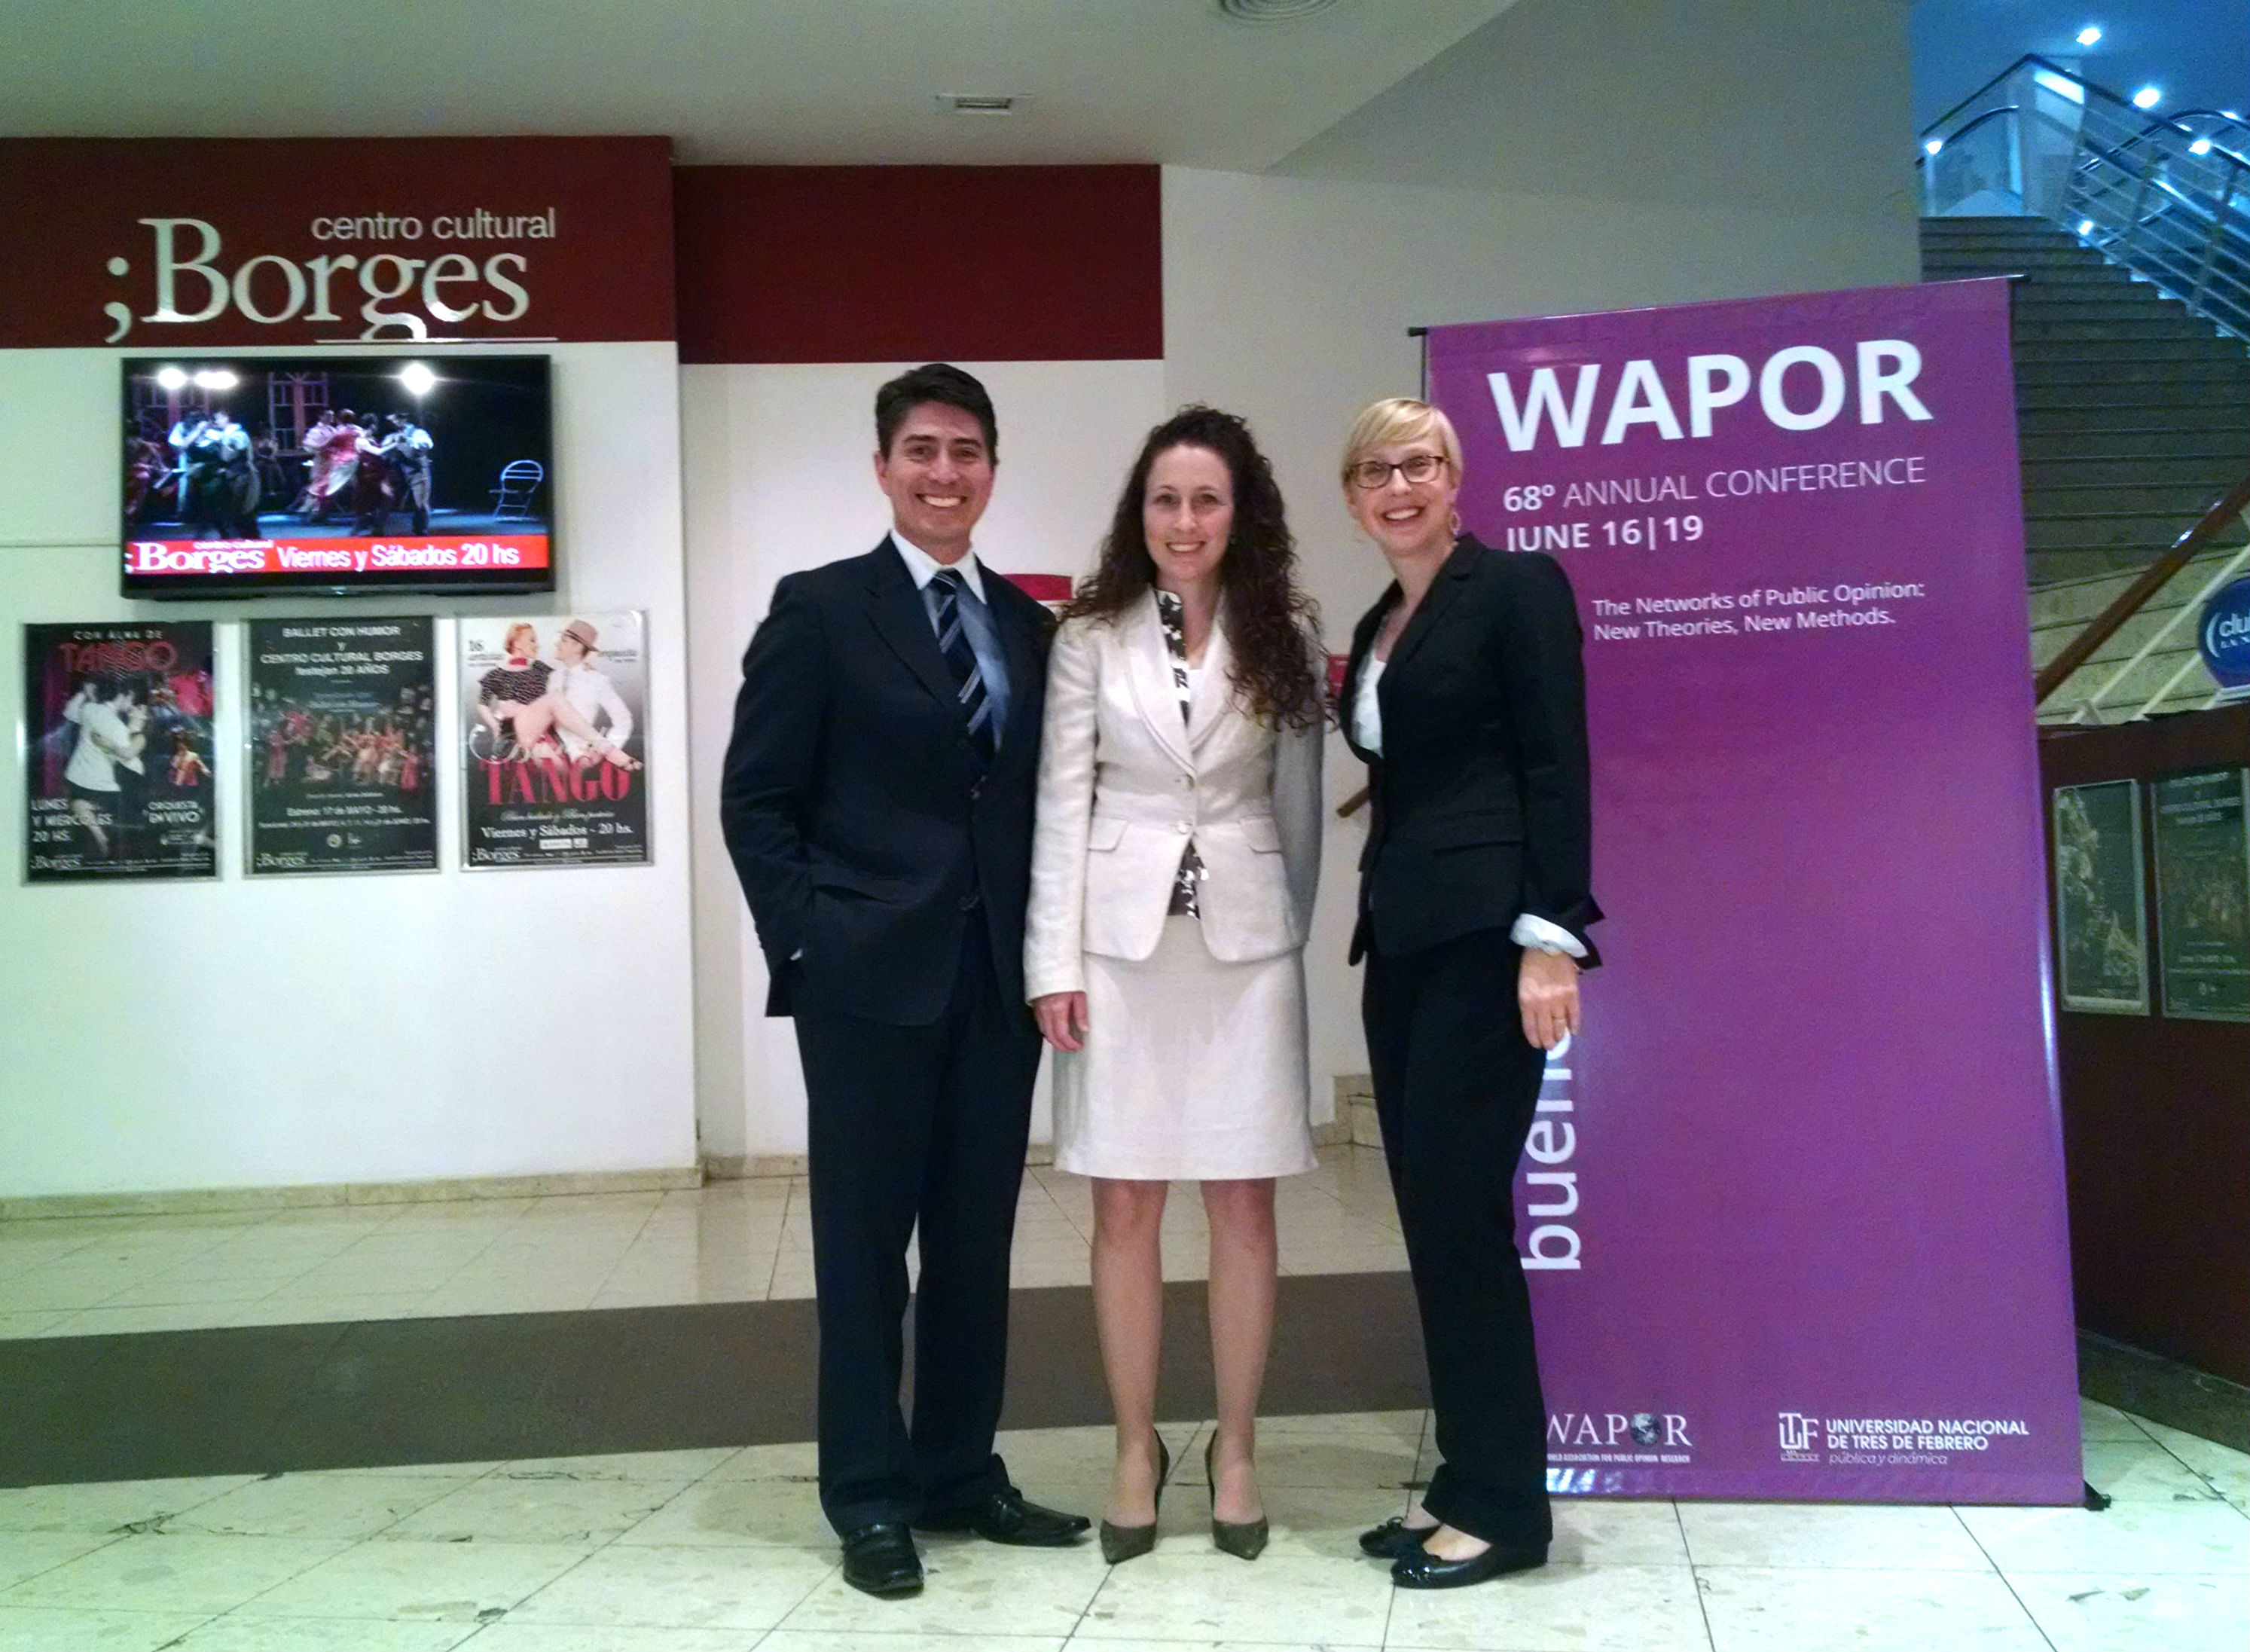 Photo Credit: Wals, Barton, and Hillebrecht standing together after presenting their research